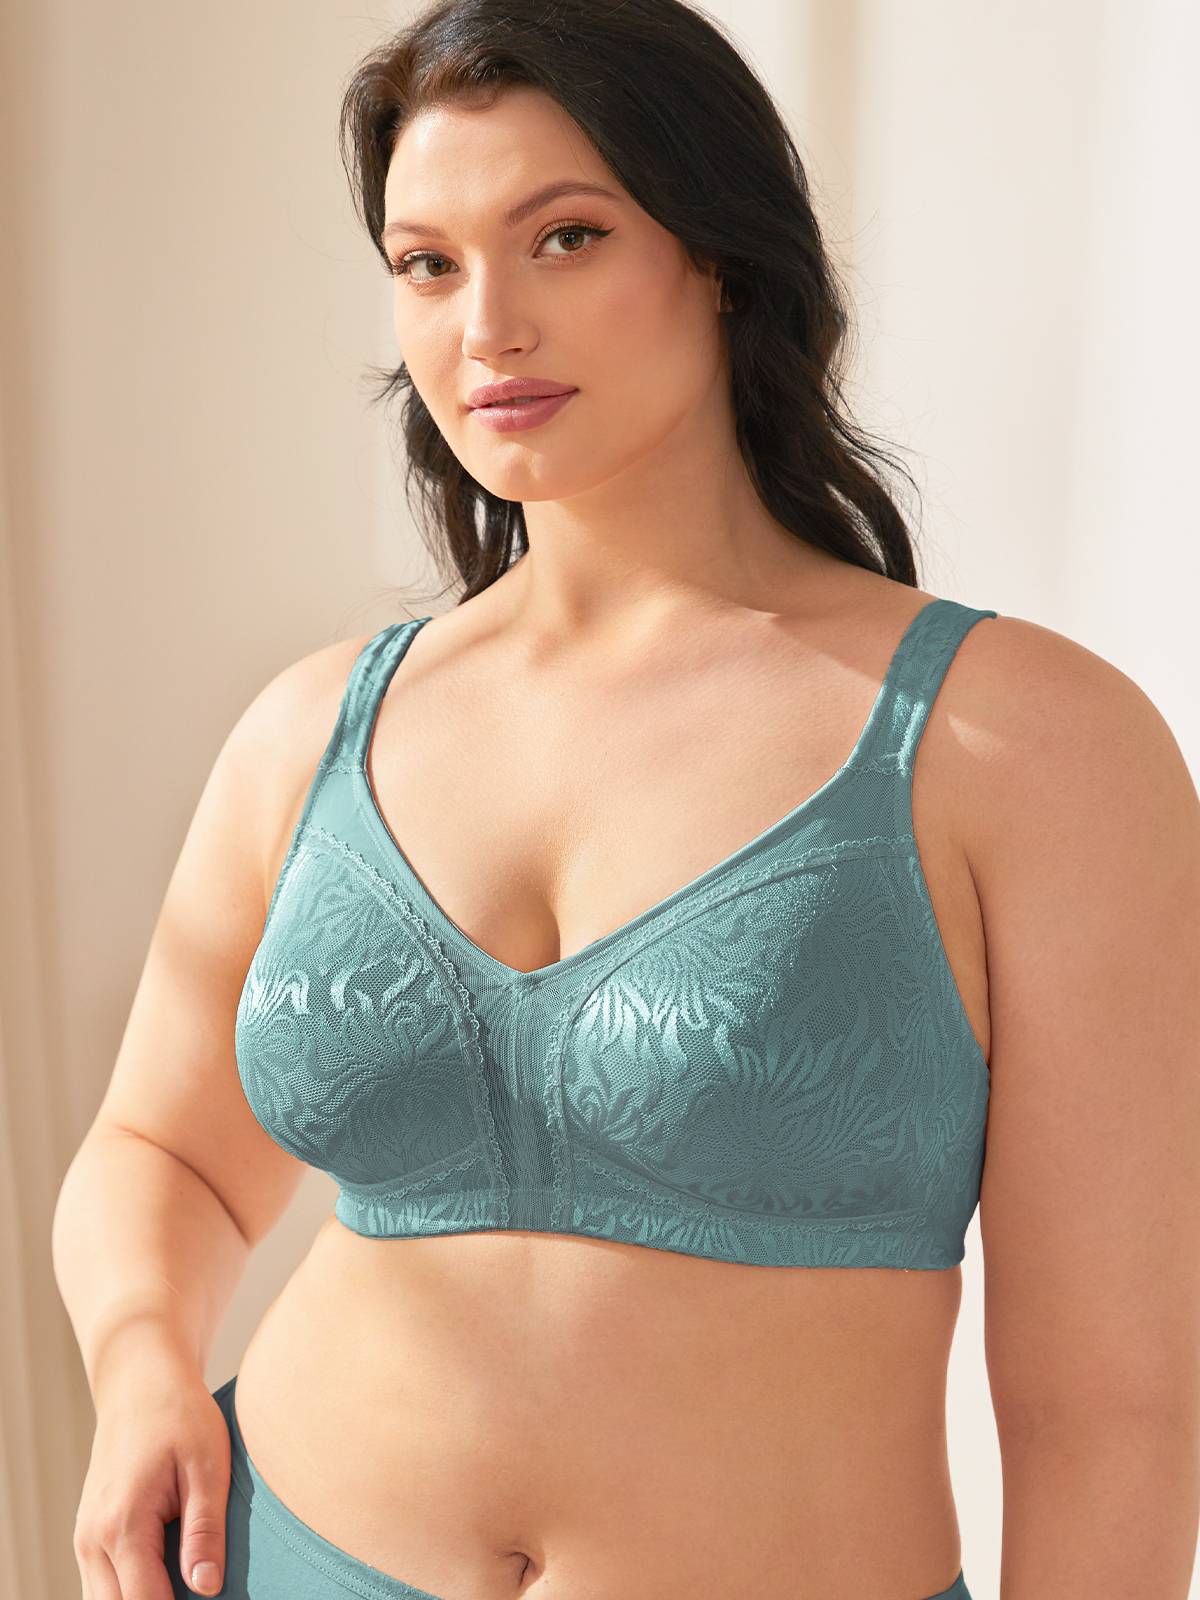  Full Plus Size Cup Vest Bras for Women Wireless Lace Comfort  Soft Big Bust Minimizer Bra Summer Bralette Underwear (Color : Green, Size  : 38/85B) : Clothing, Shoes & Jewelry